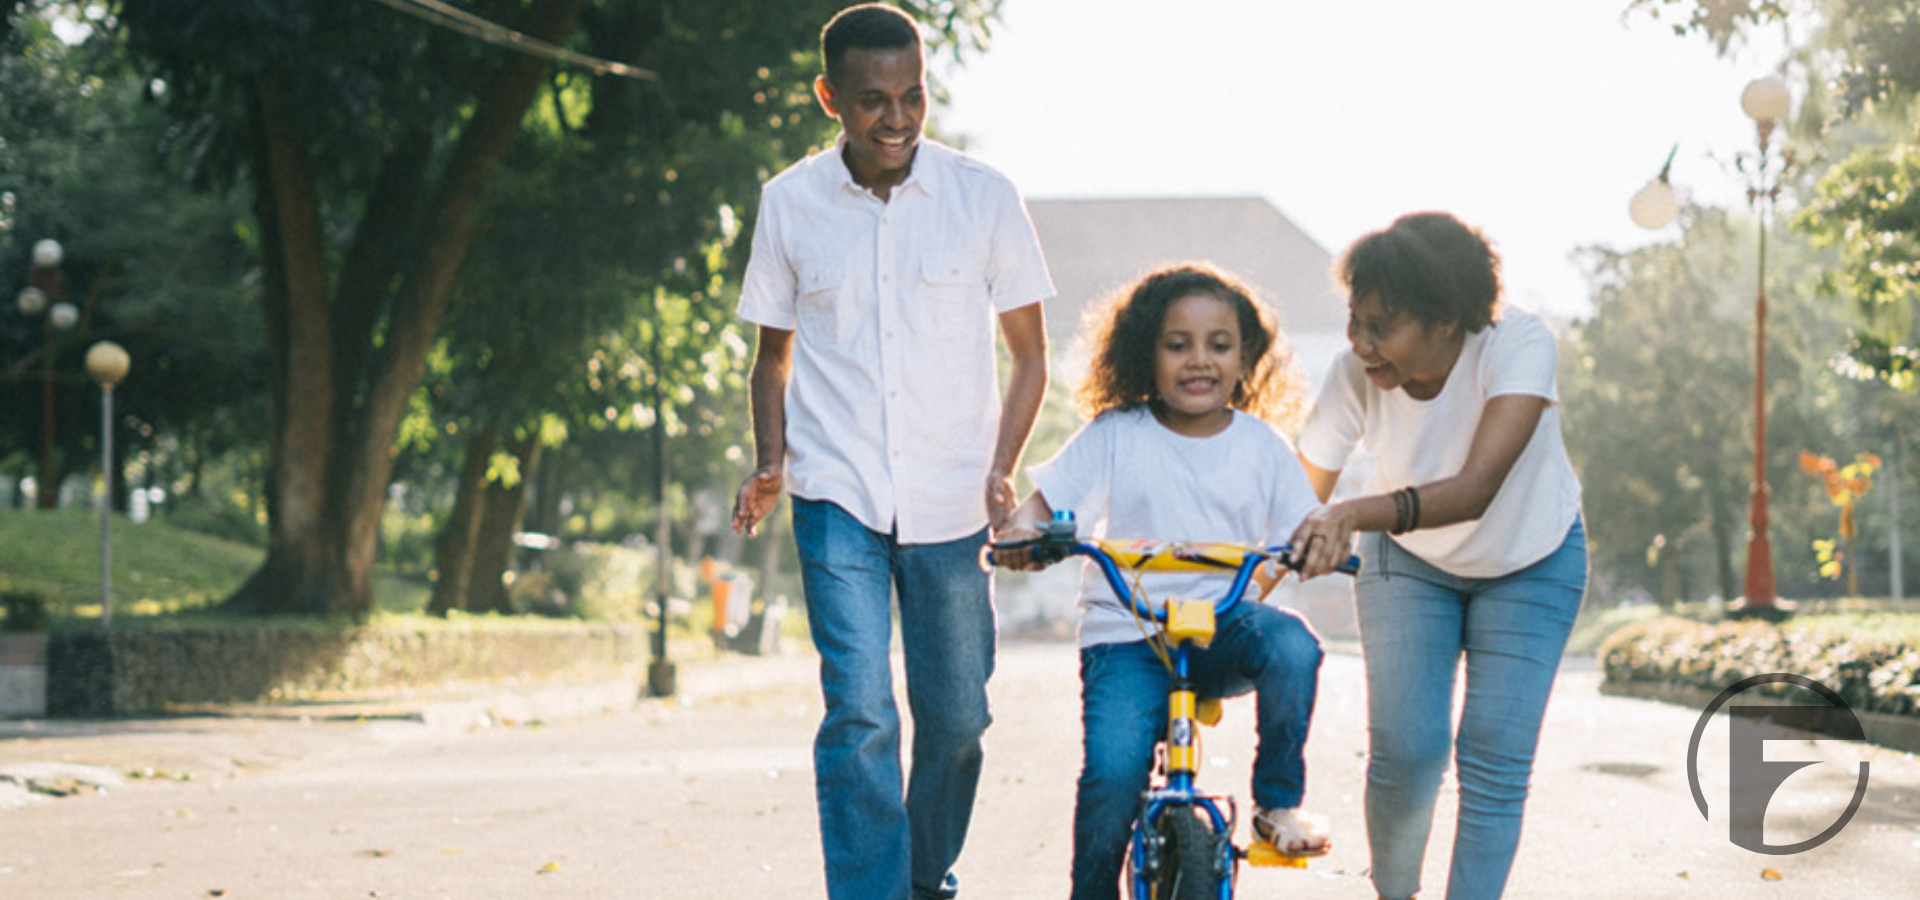 The Figgers Foundation to donate $50,000 worth of bikes to children and teens in Foster Care